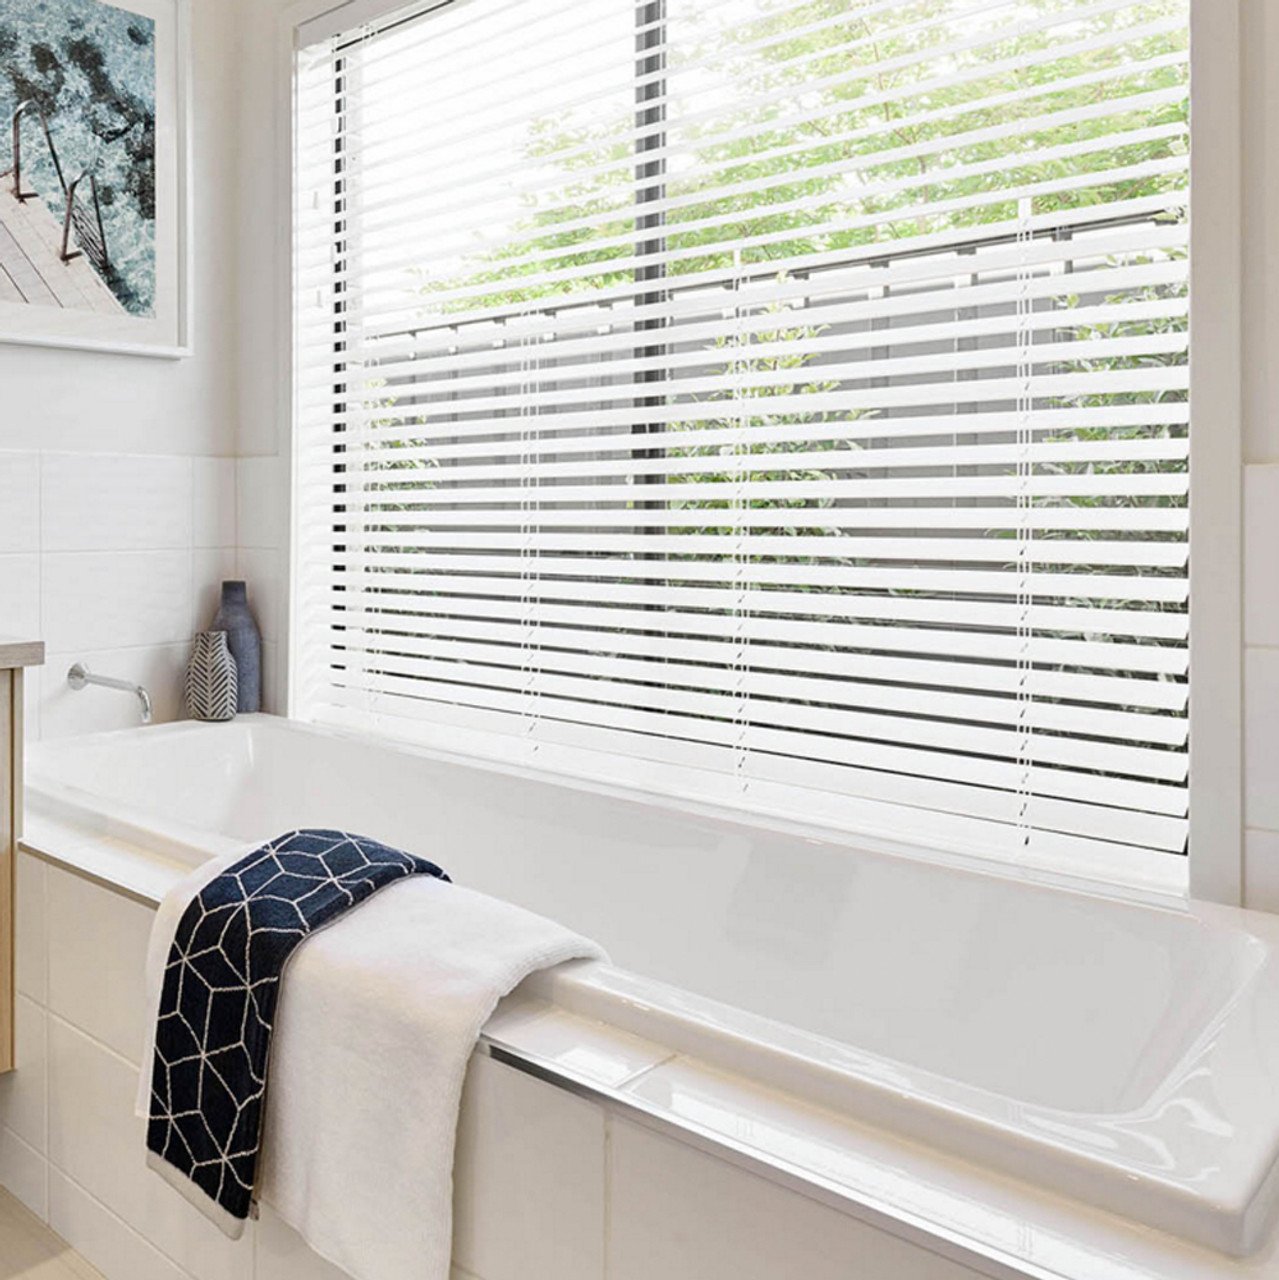 timber-style-slat-blinds-white-quickfit-blinds__81156.jpg